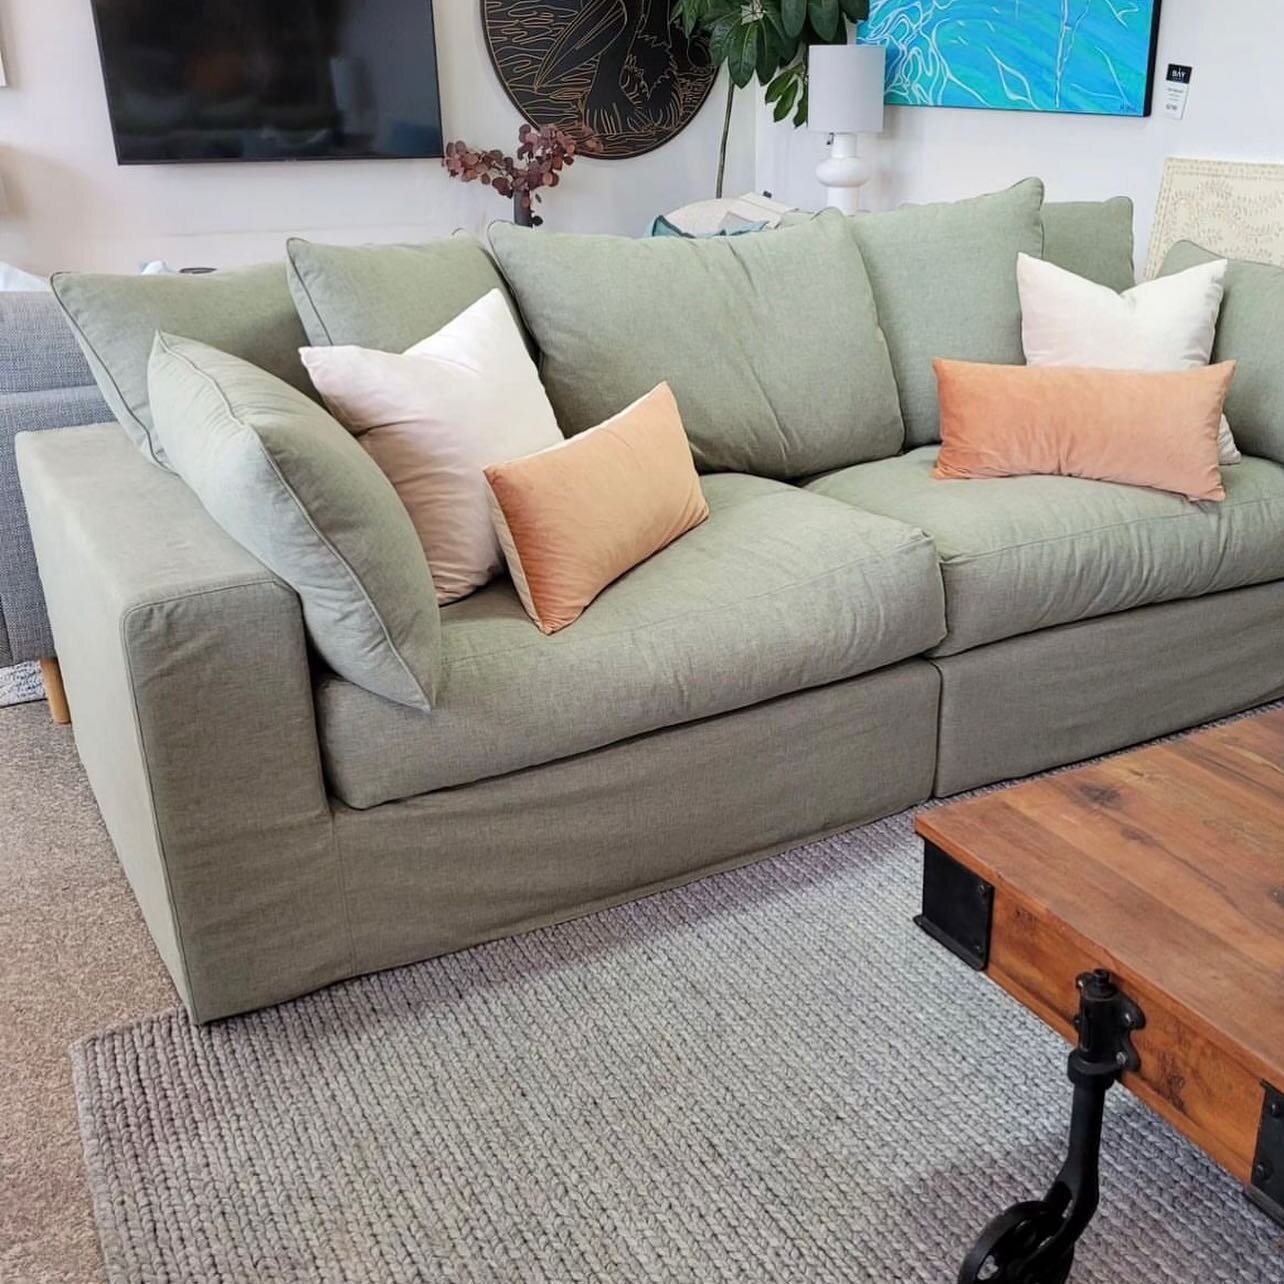 Pure perfection and comfort ~ the Hampton Slip Cover lounge.

Covered in @warwickfabrics Chambray range or washable fabrics. 

WA made |  choice of fabrics |  choice of sizes |  support local and WA manufacturers 

#furniture #interiordesign #lounge 